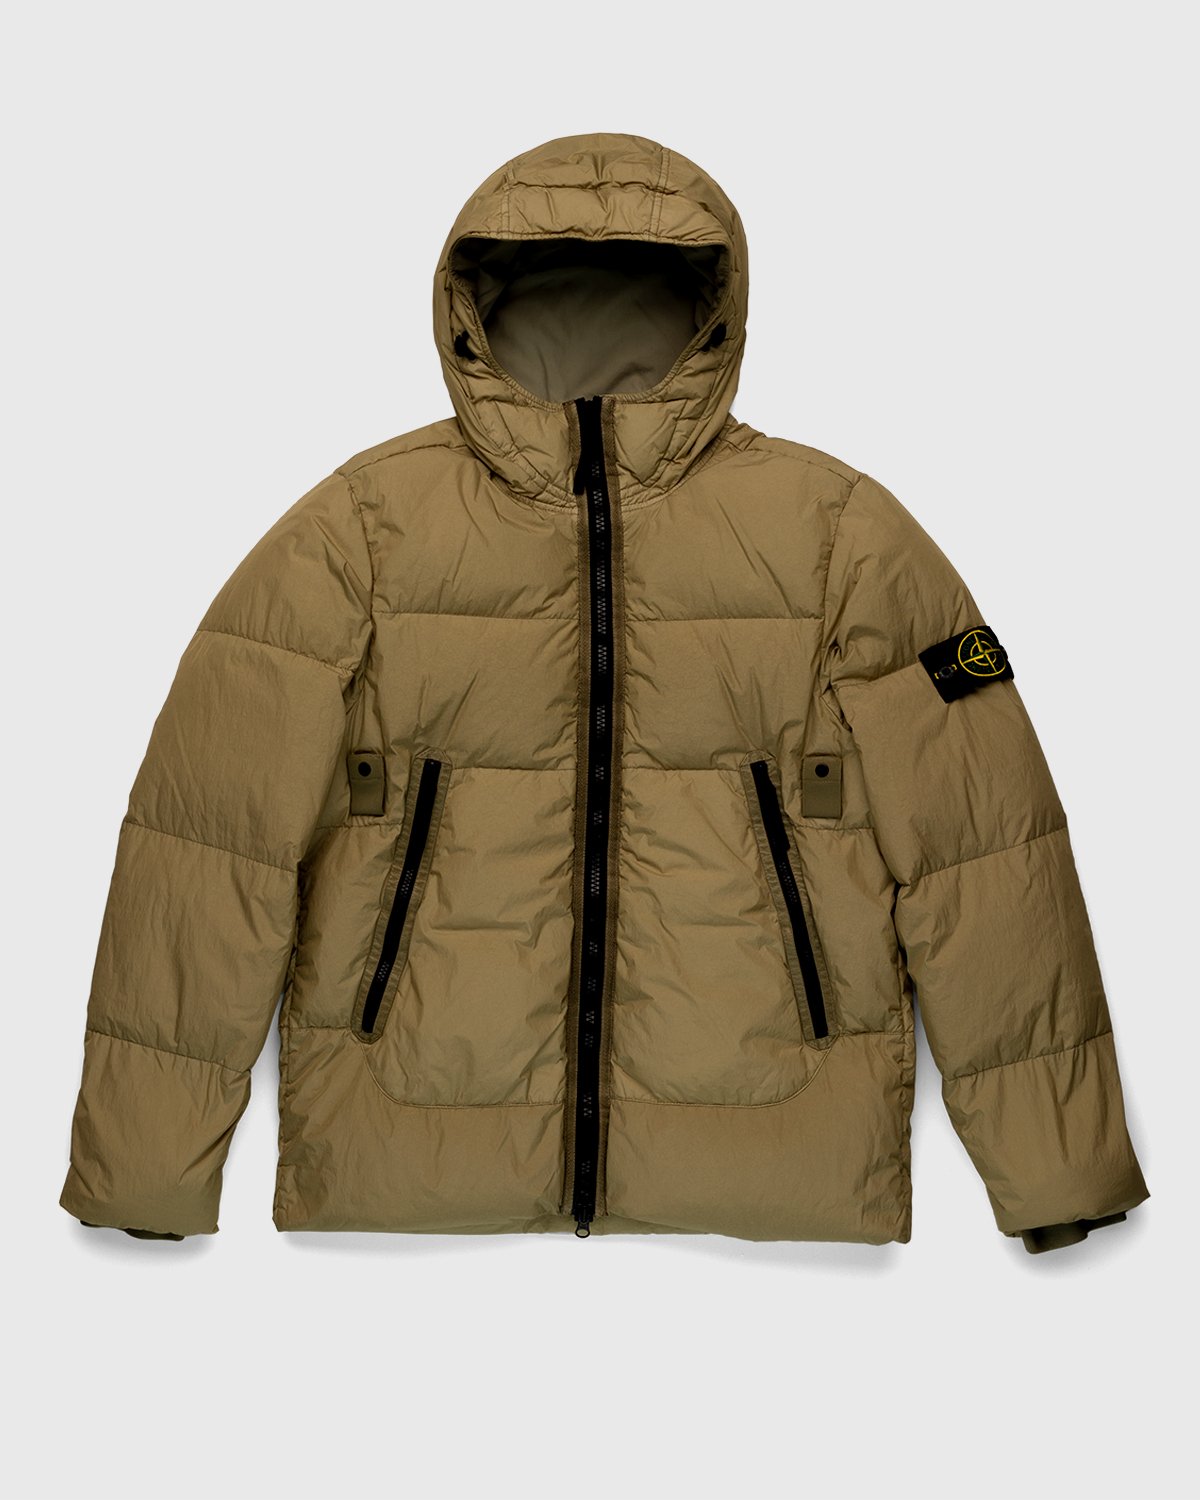 Stone Island - Real Down Jacket Natural Beige - Clothing - Beige - Image 1